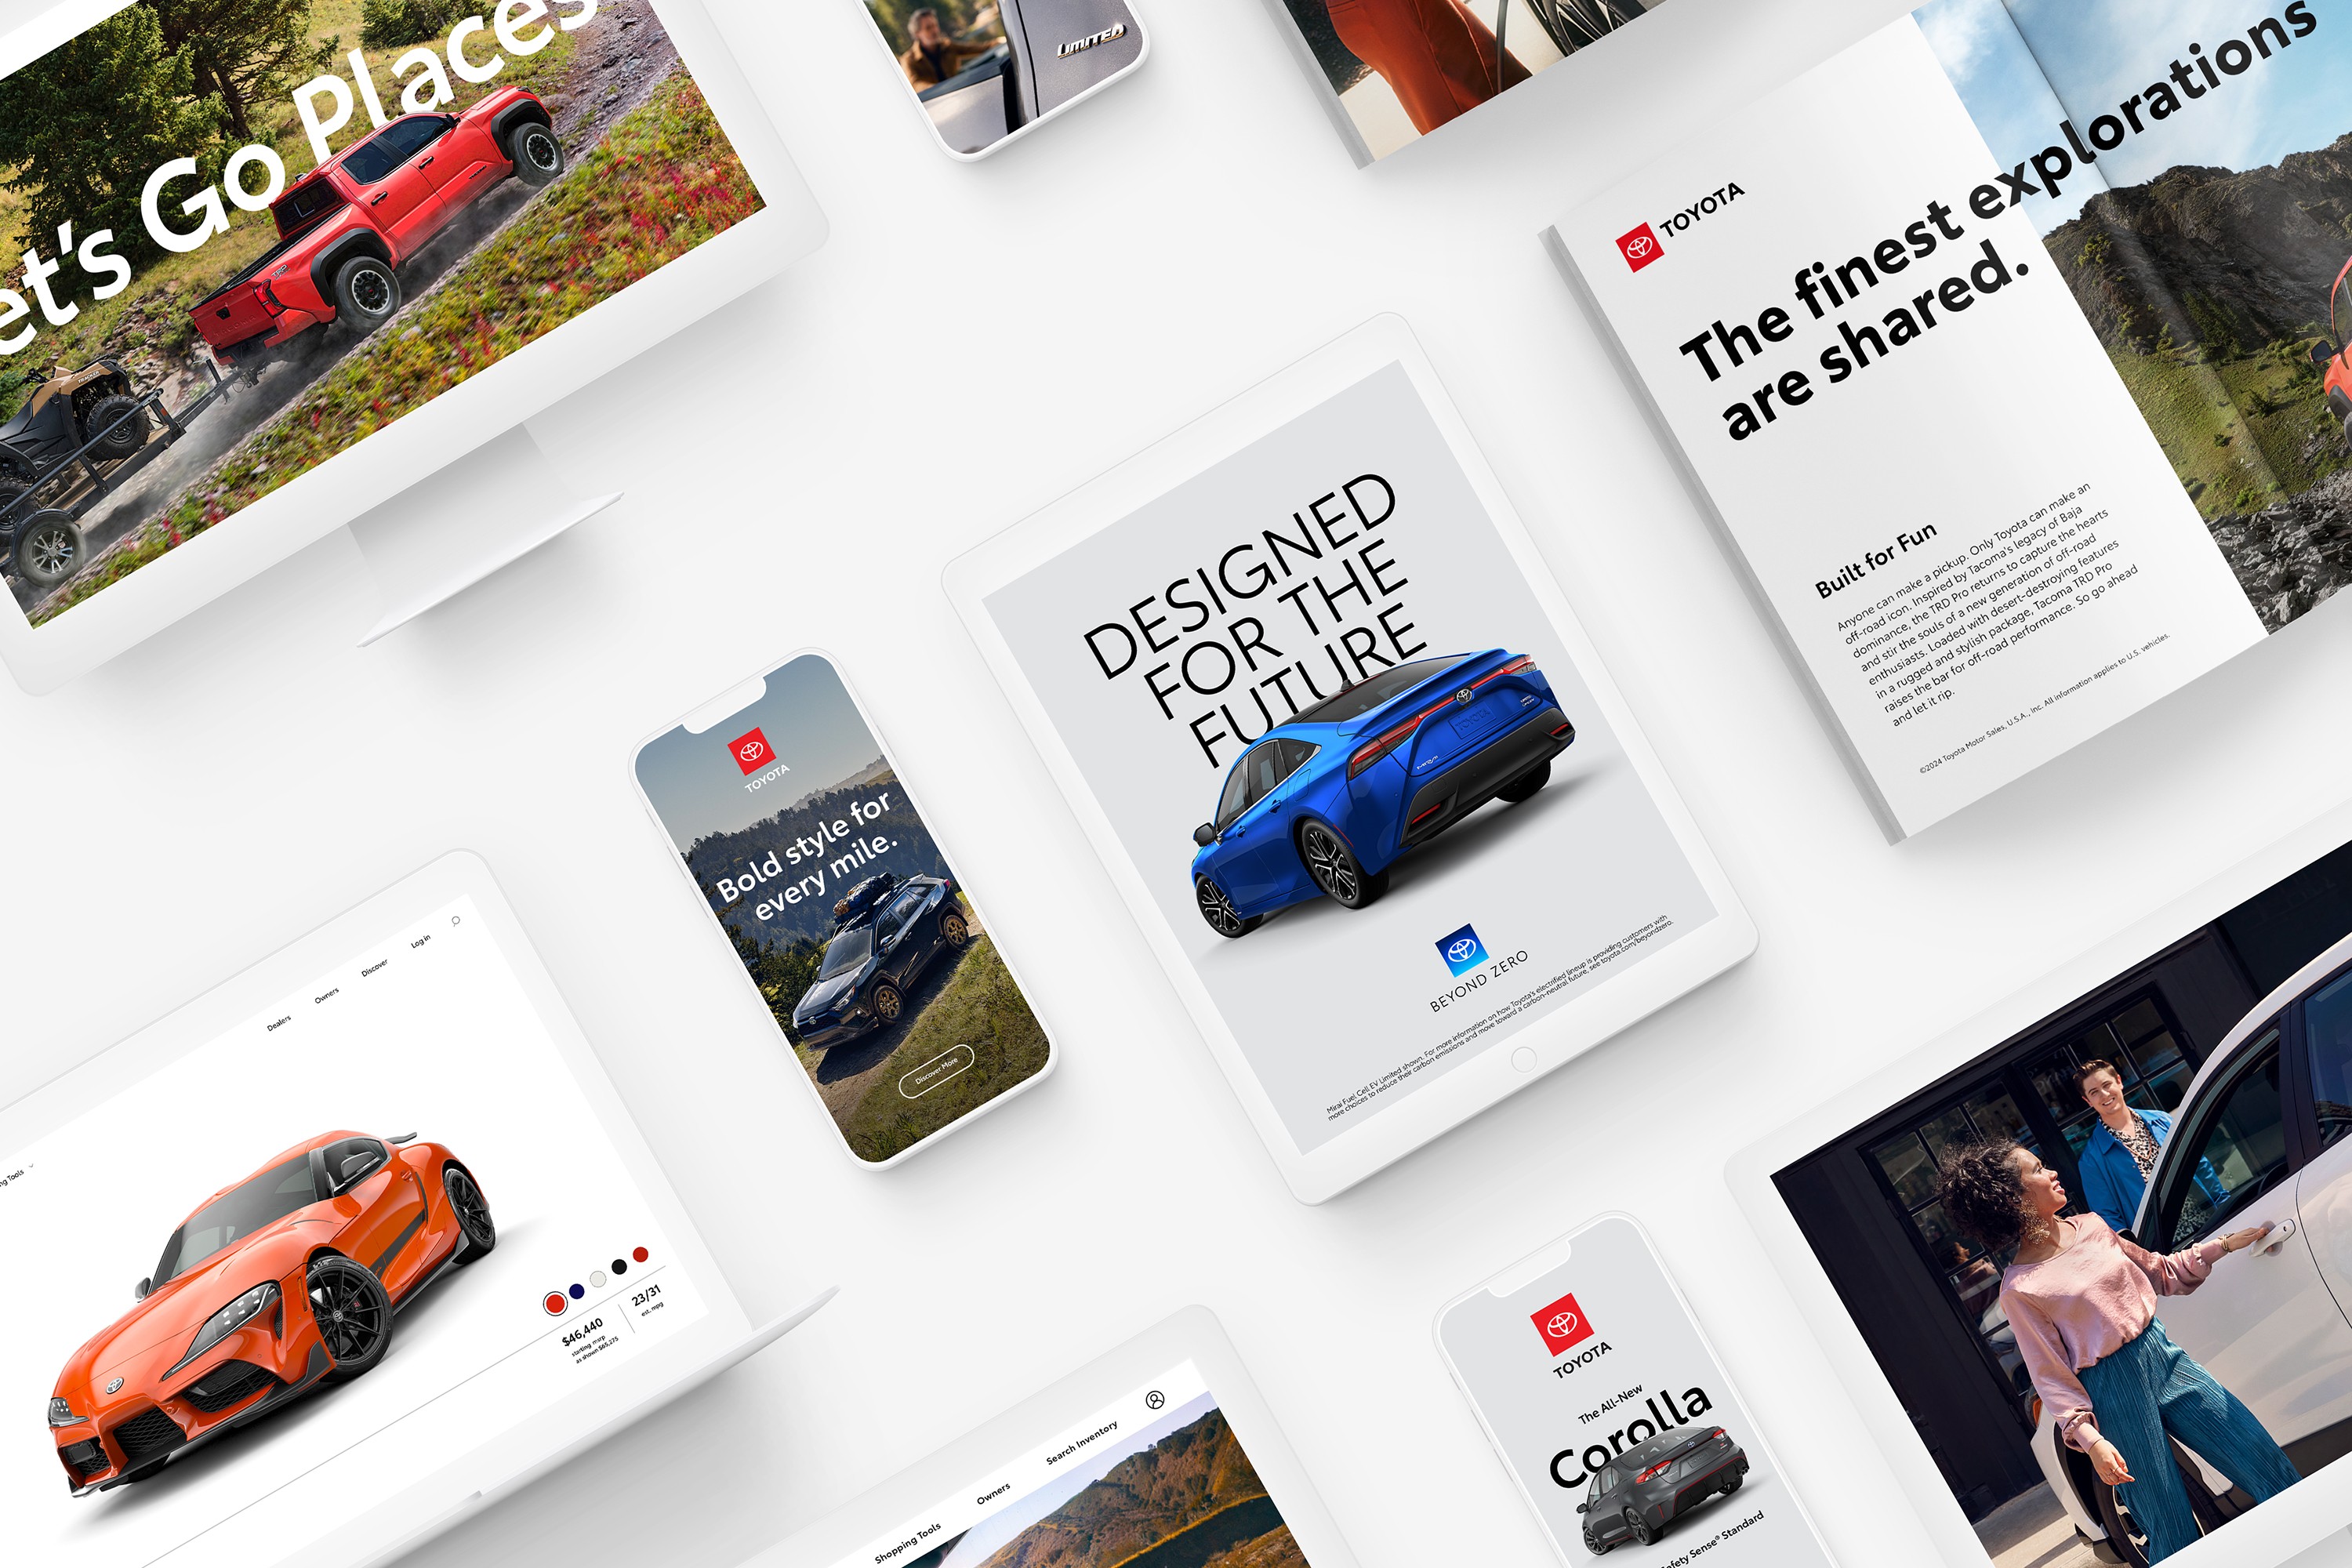 An iPhone, iPad and magazine display images of different Toyota ads and website pages.